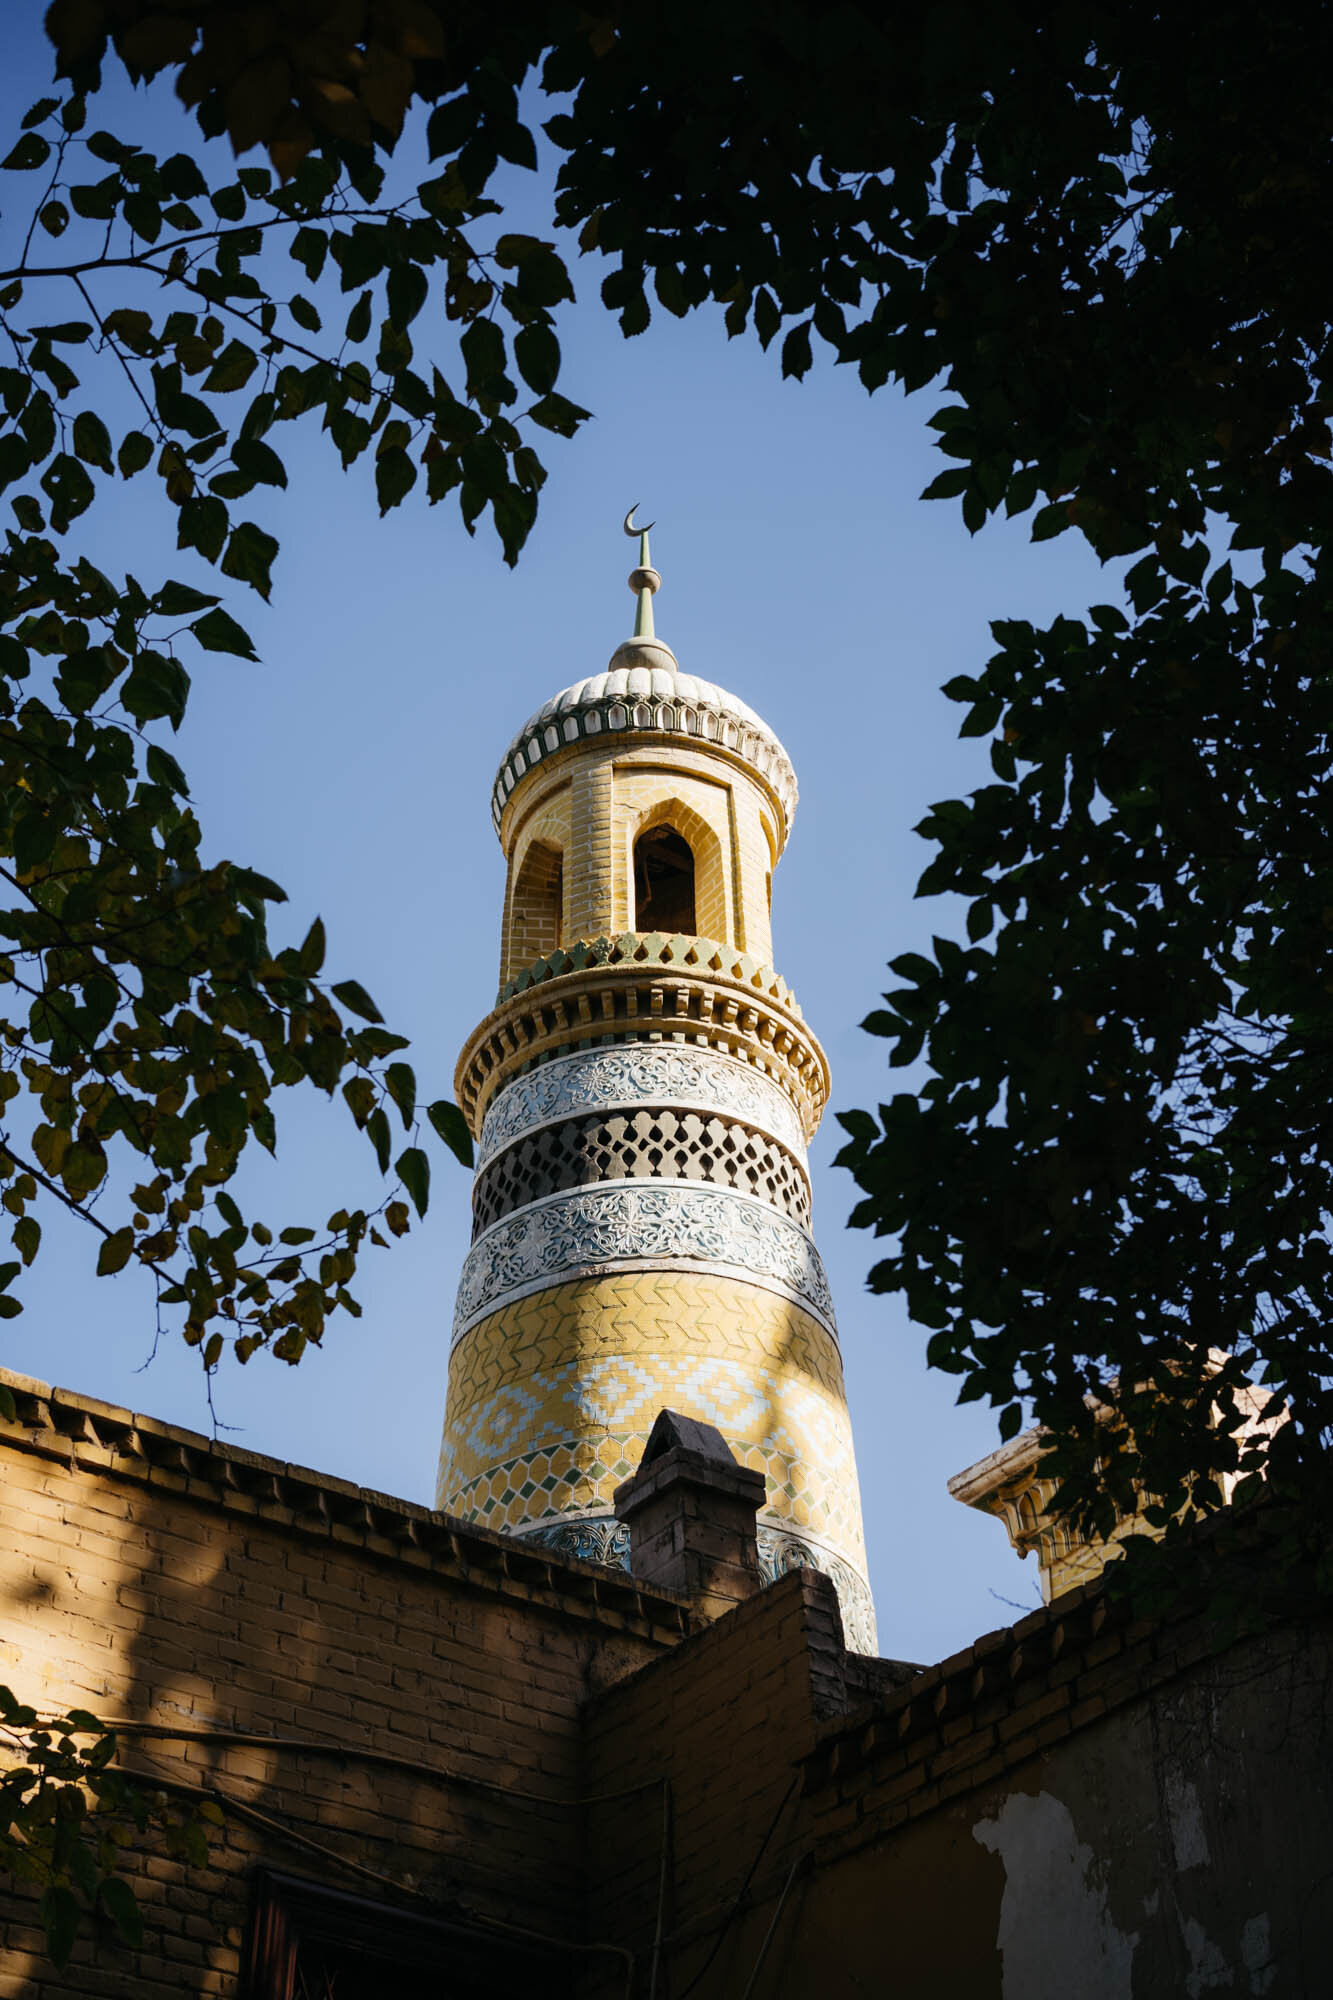  A minaret from the Id Kah Mosque 